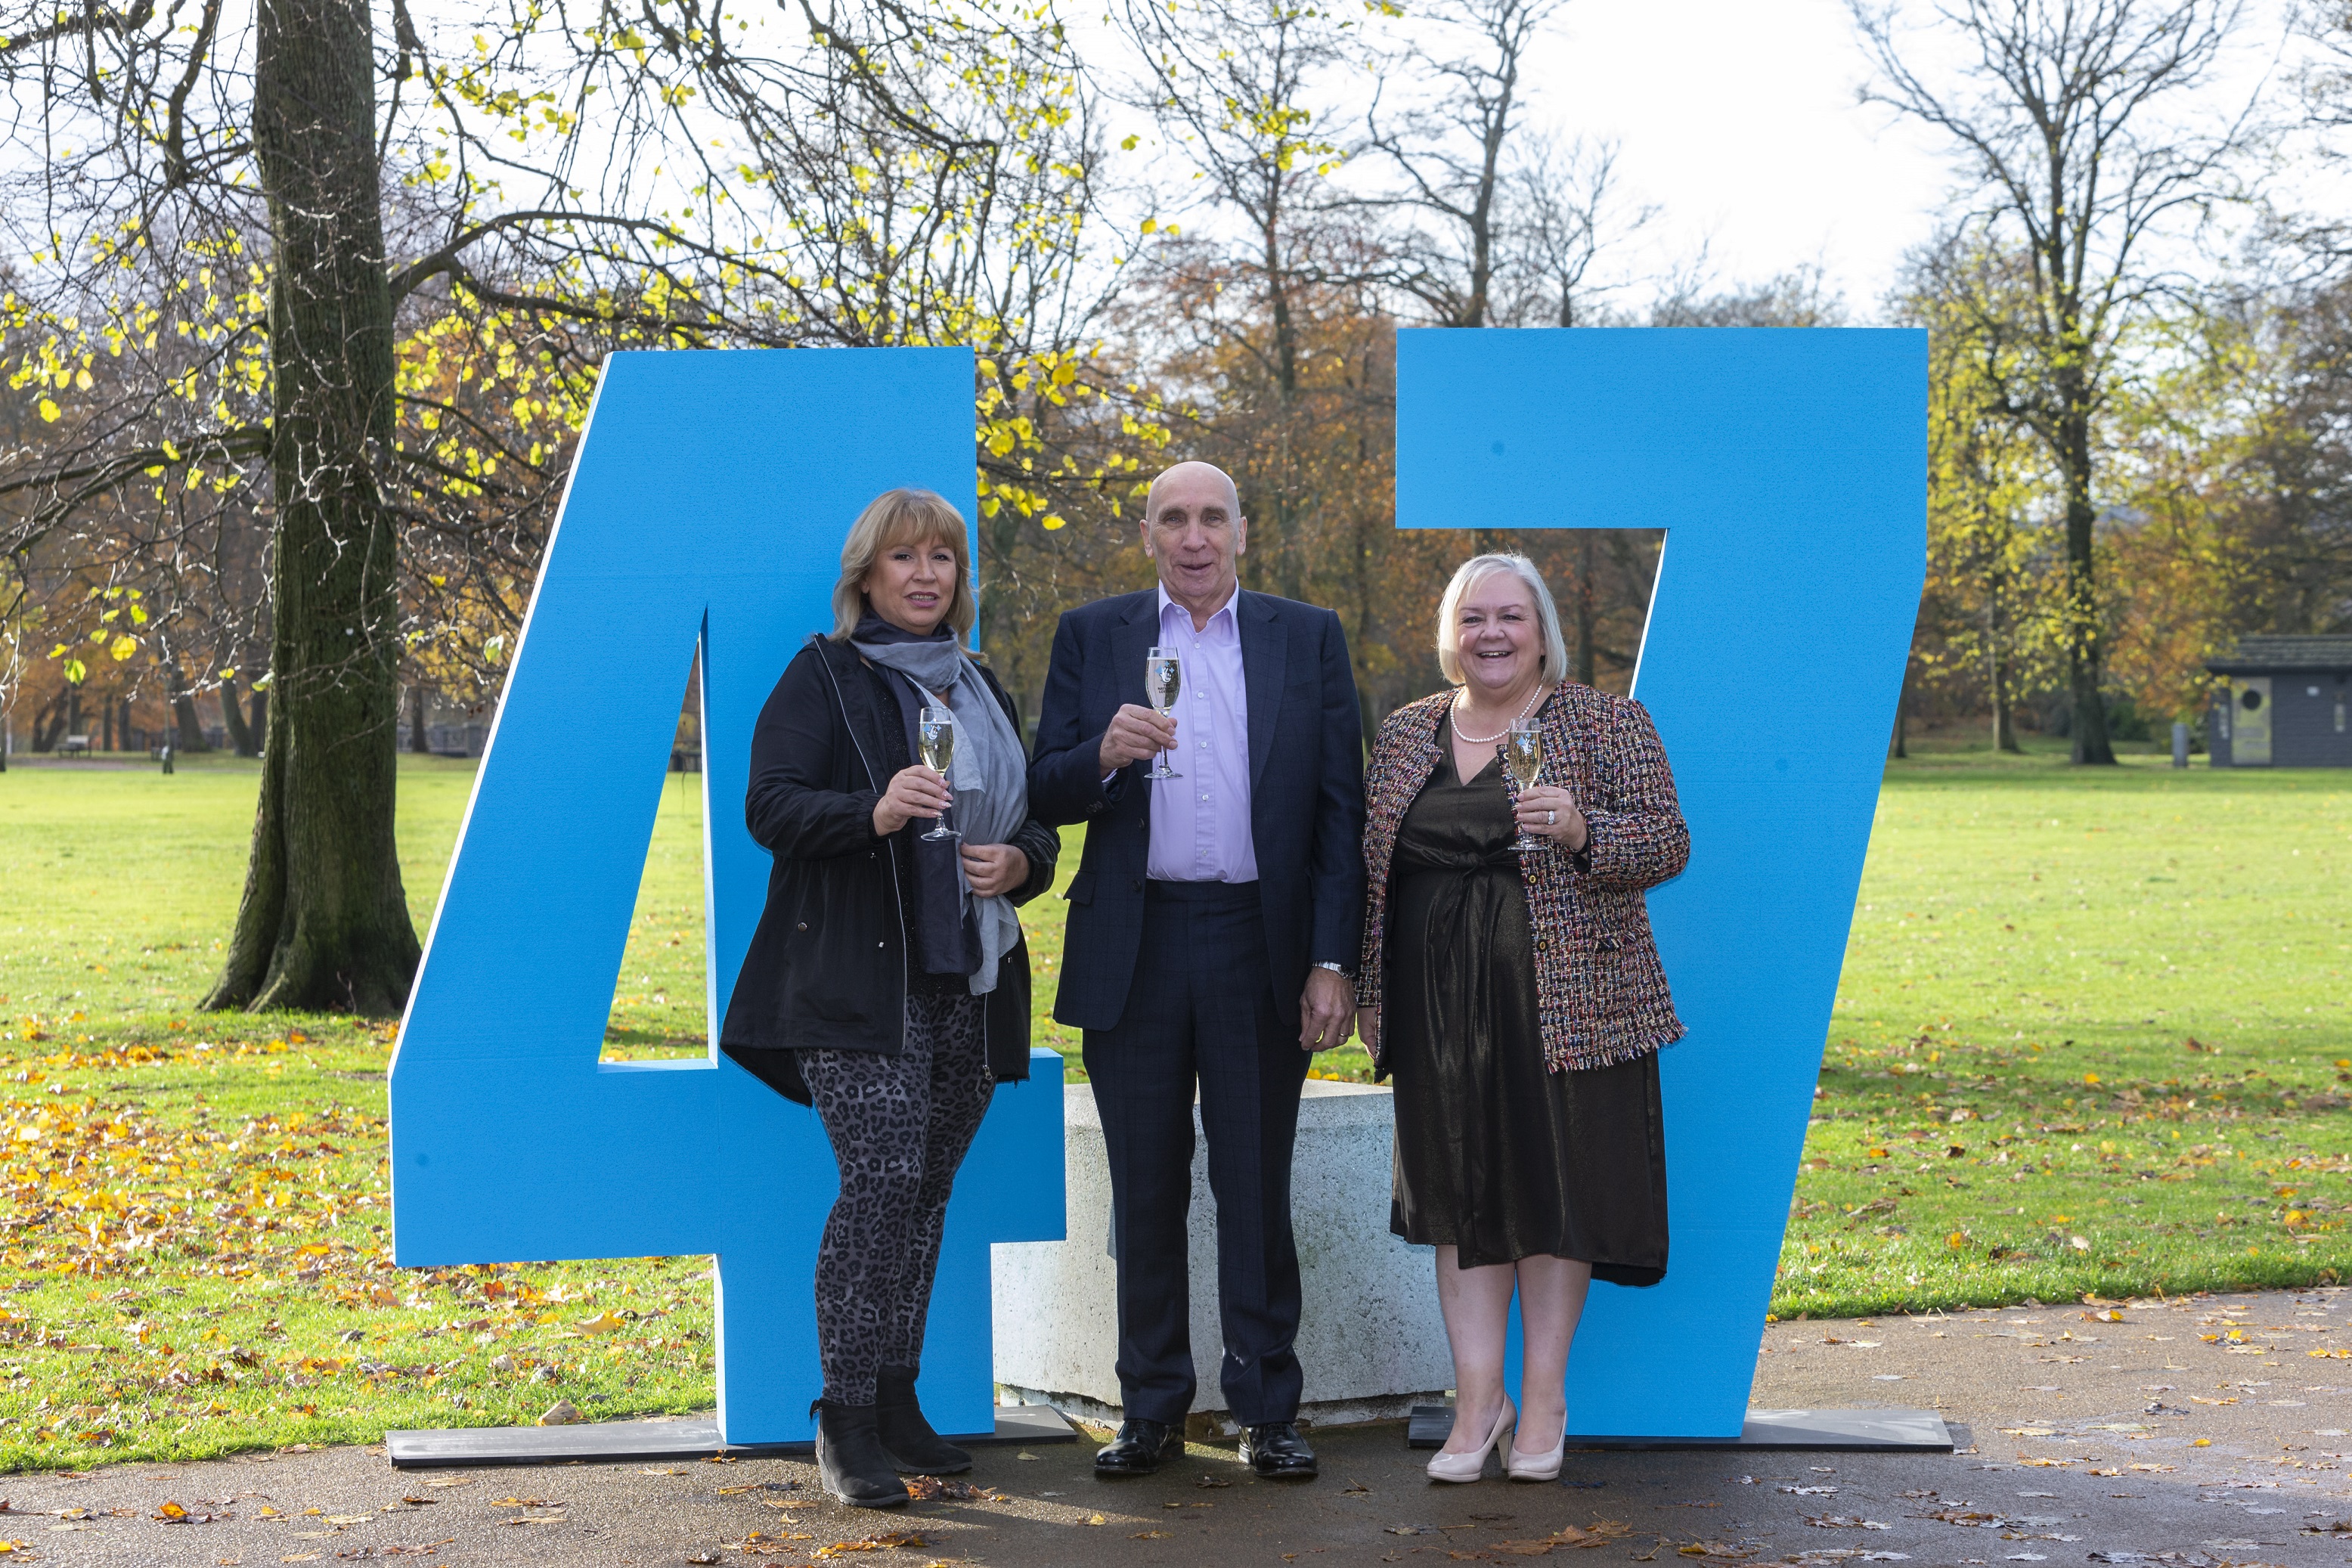 Pictured: local winners Libby Elliot and Fred and Lesley Higgins at a Lottery funded venue to celebrate the number of Lottery millionaires that have been created since it started 25 years ago.